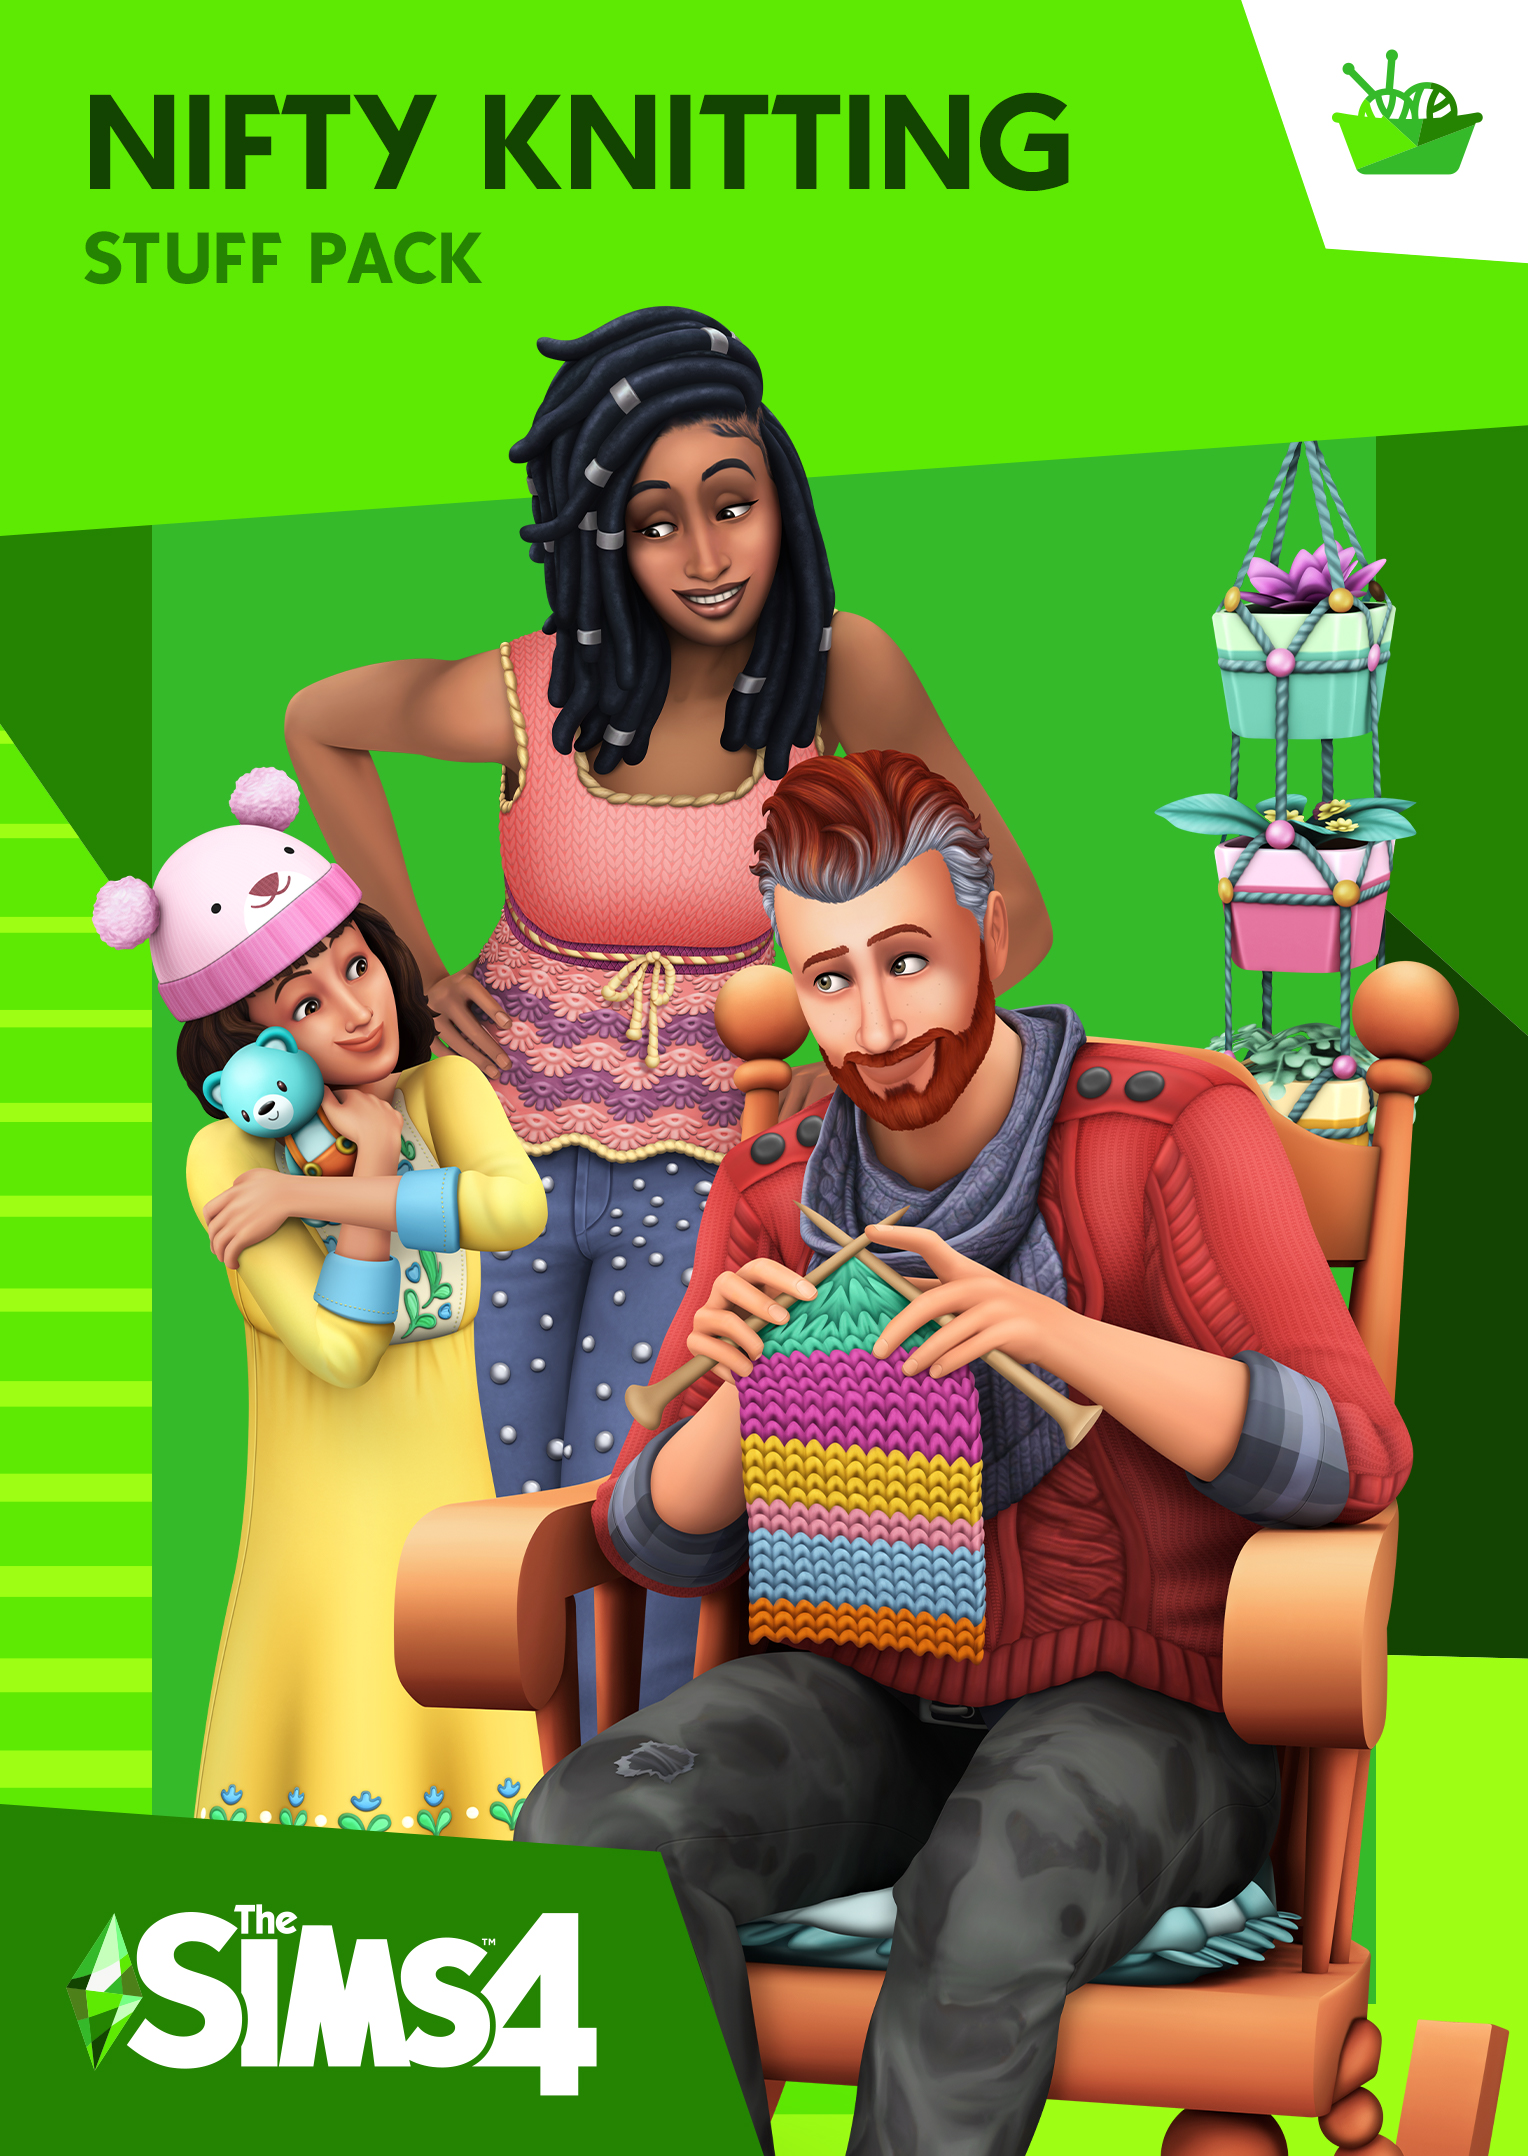 The Sims 4: Nifty Knitting Stuff, The Sims Wiki